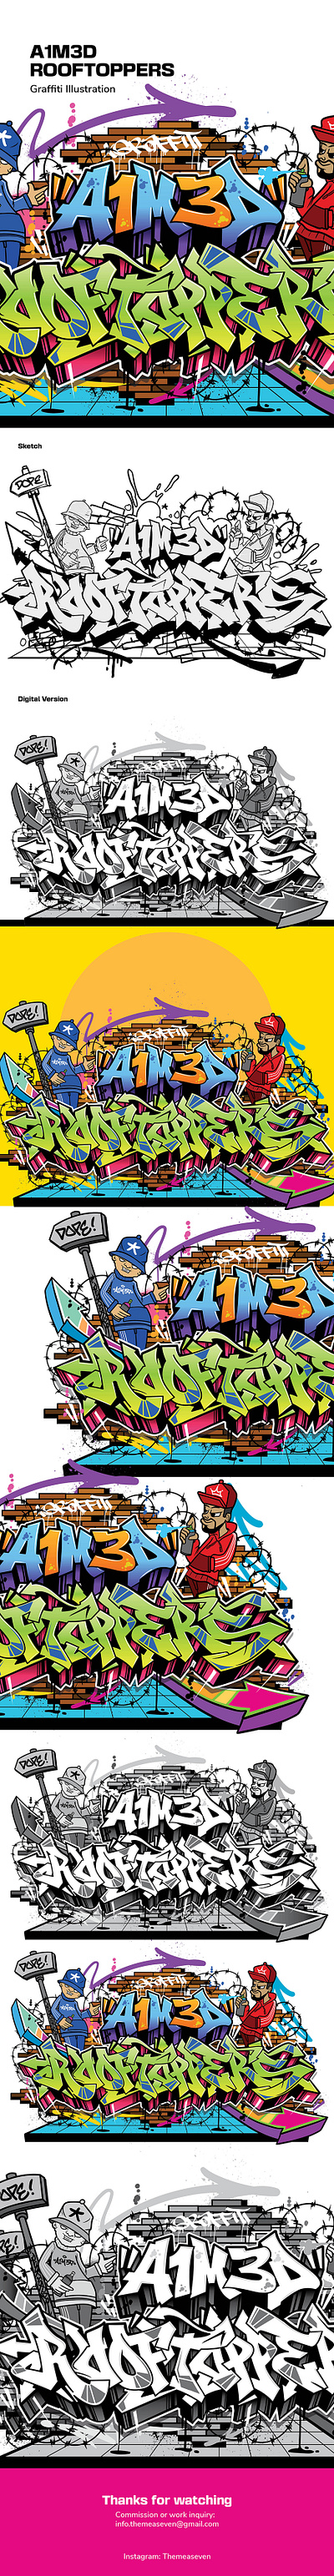 A1M3D Rooftoppers Graffiti Illustration artwork digital illustration digitalillustration graff graffiti graffiti art graffiti vector graphic design illustration lettering typography vectorart